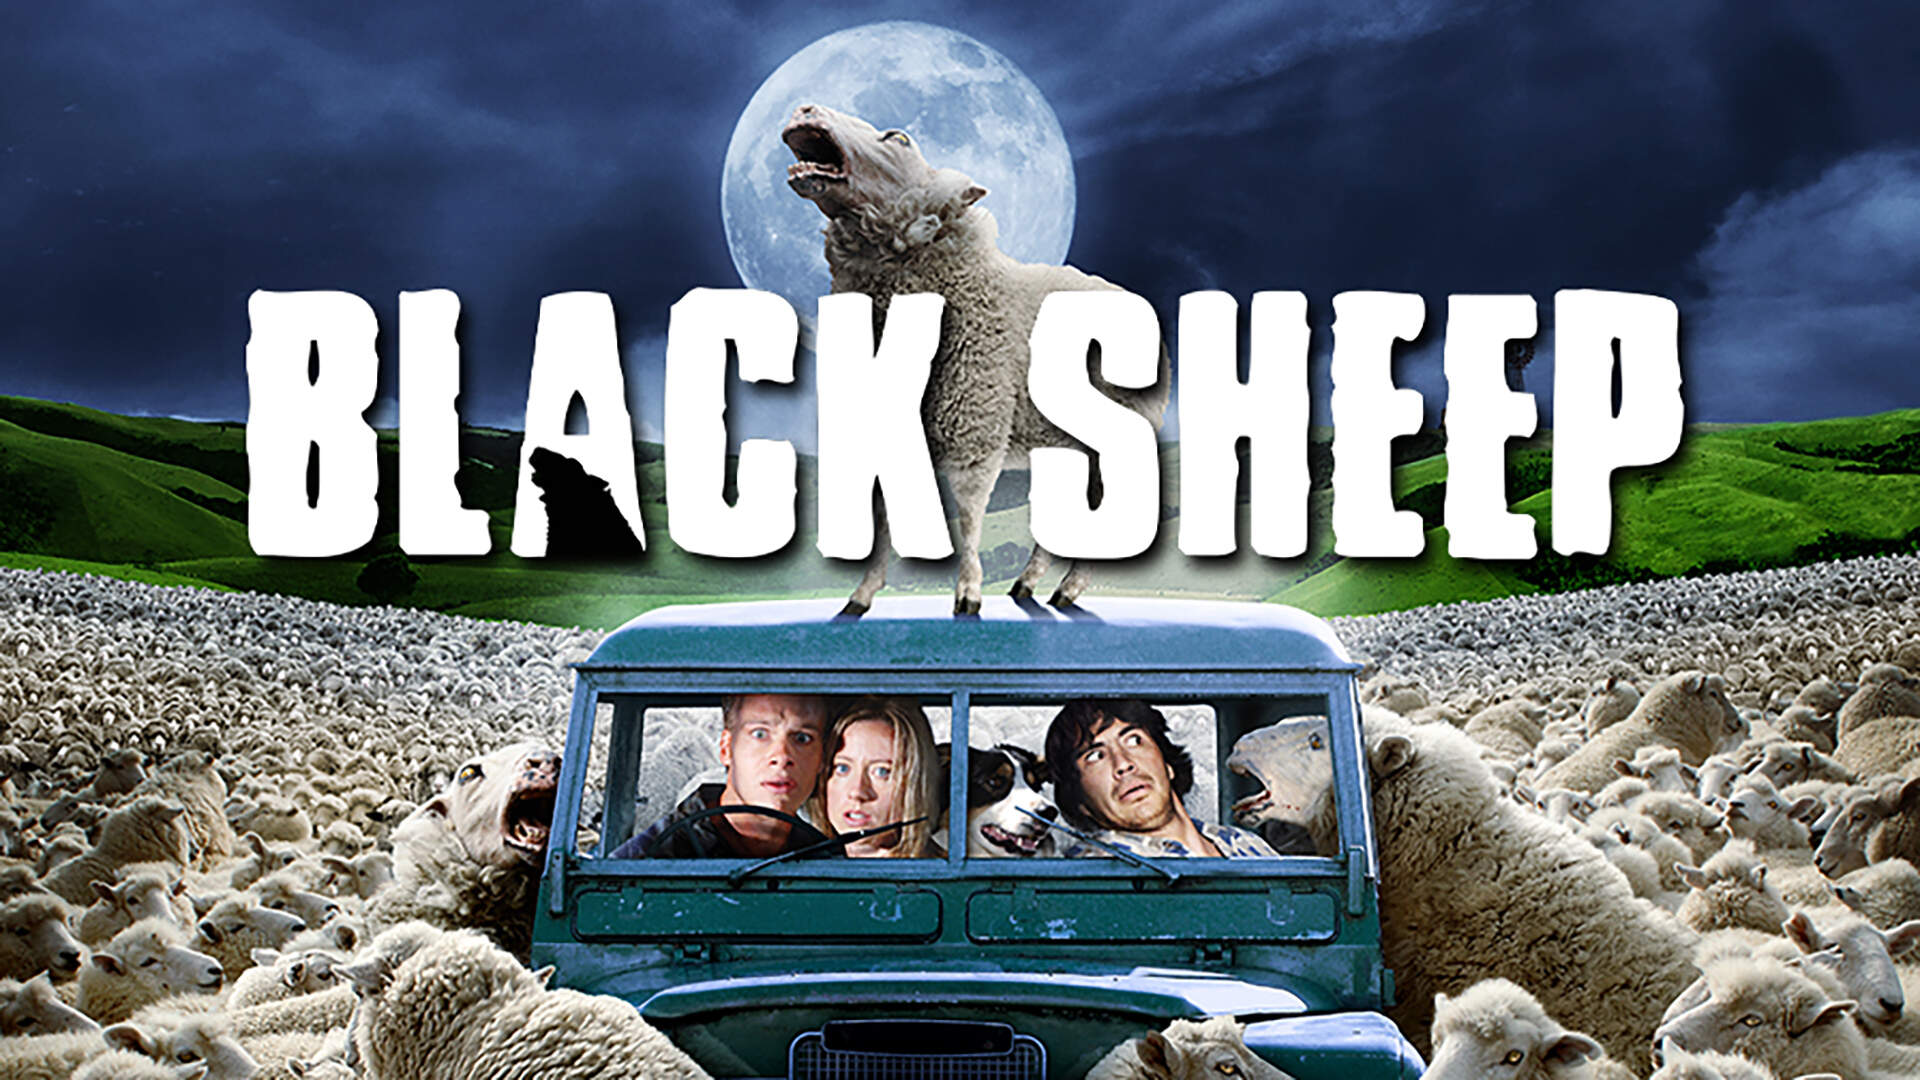 46-facts-about-the-movie-black-sheep